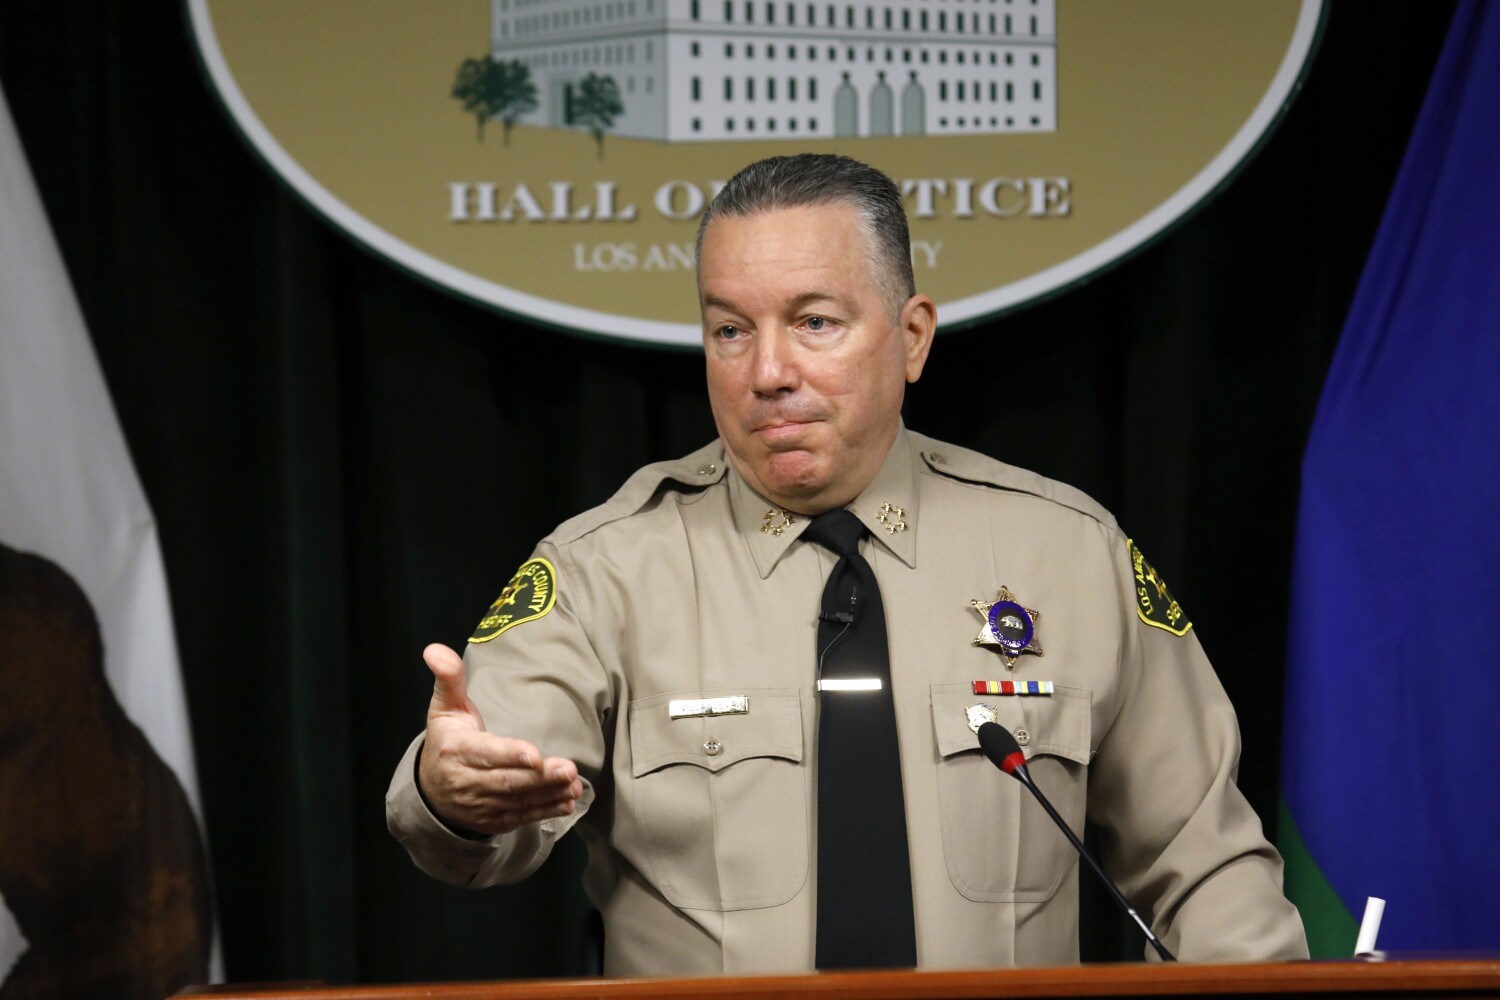 L.A. County's sheriff leans on his Latino identity. Does he exemplify our worst traits?